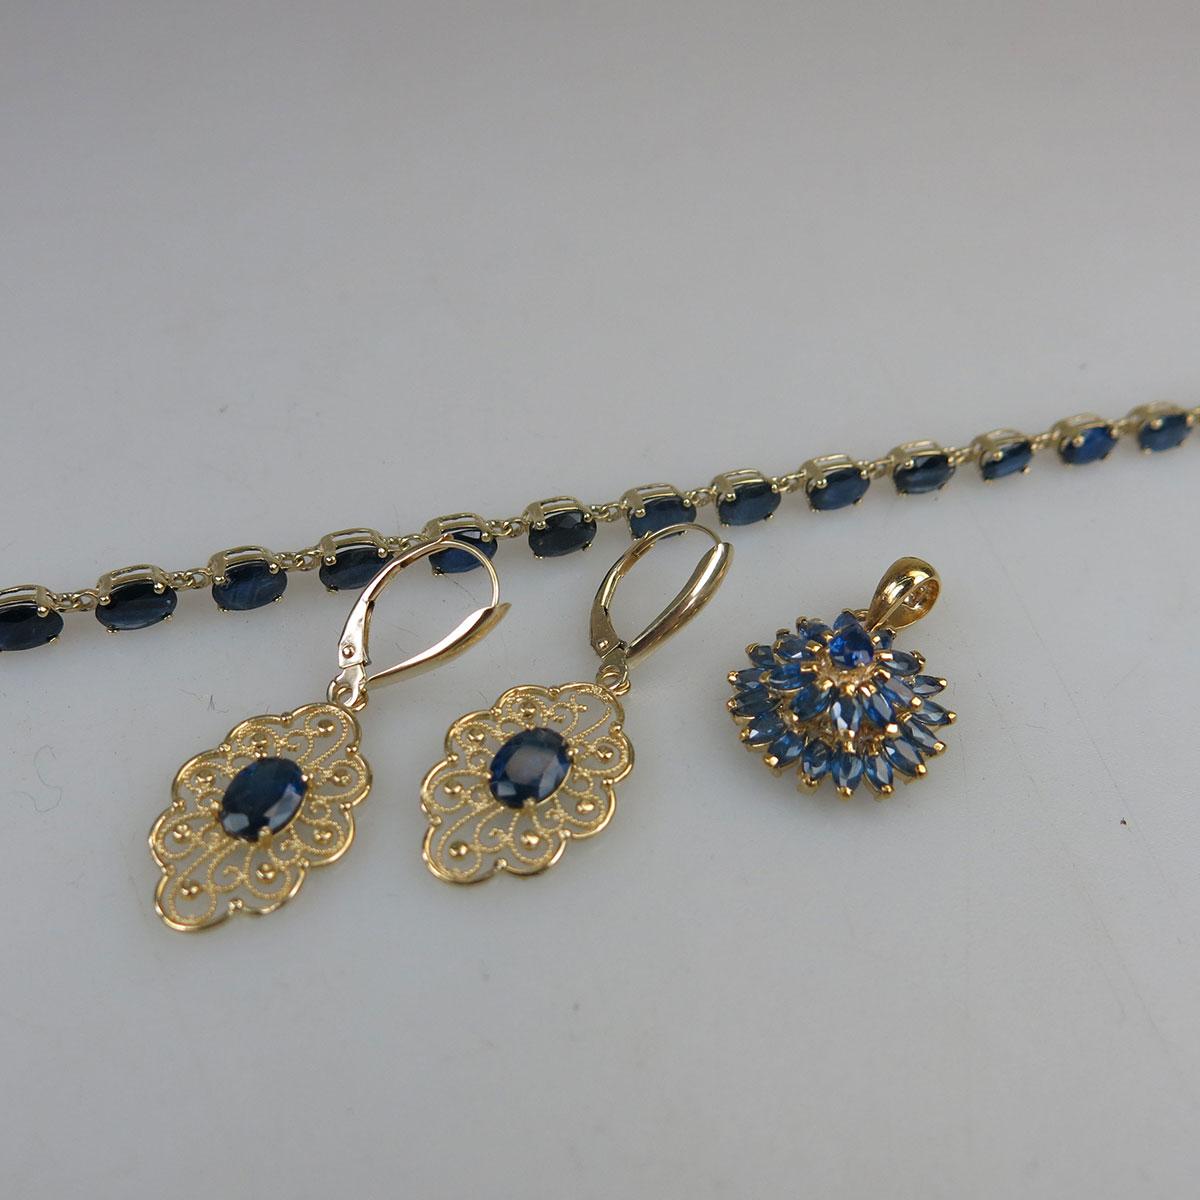 10k Yellow Gold Bracelet And 14k Yellow Gold Pendant And Earrings